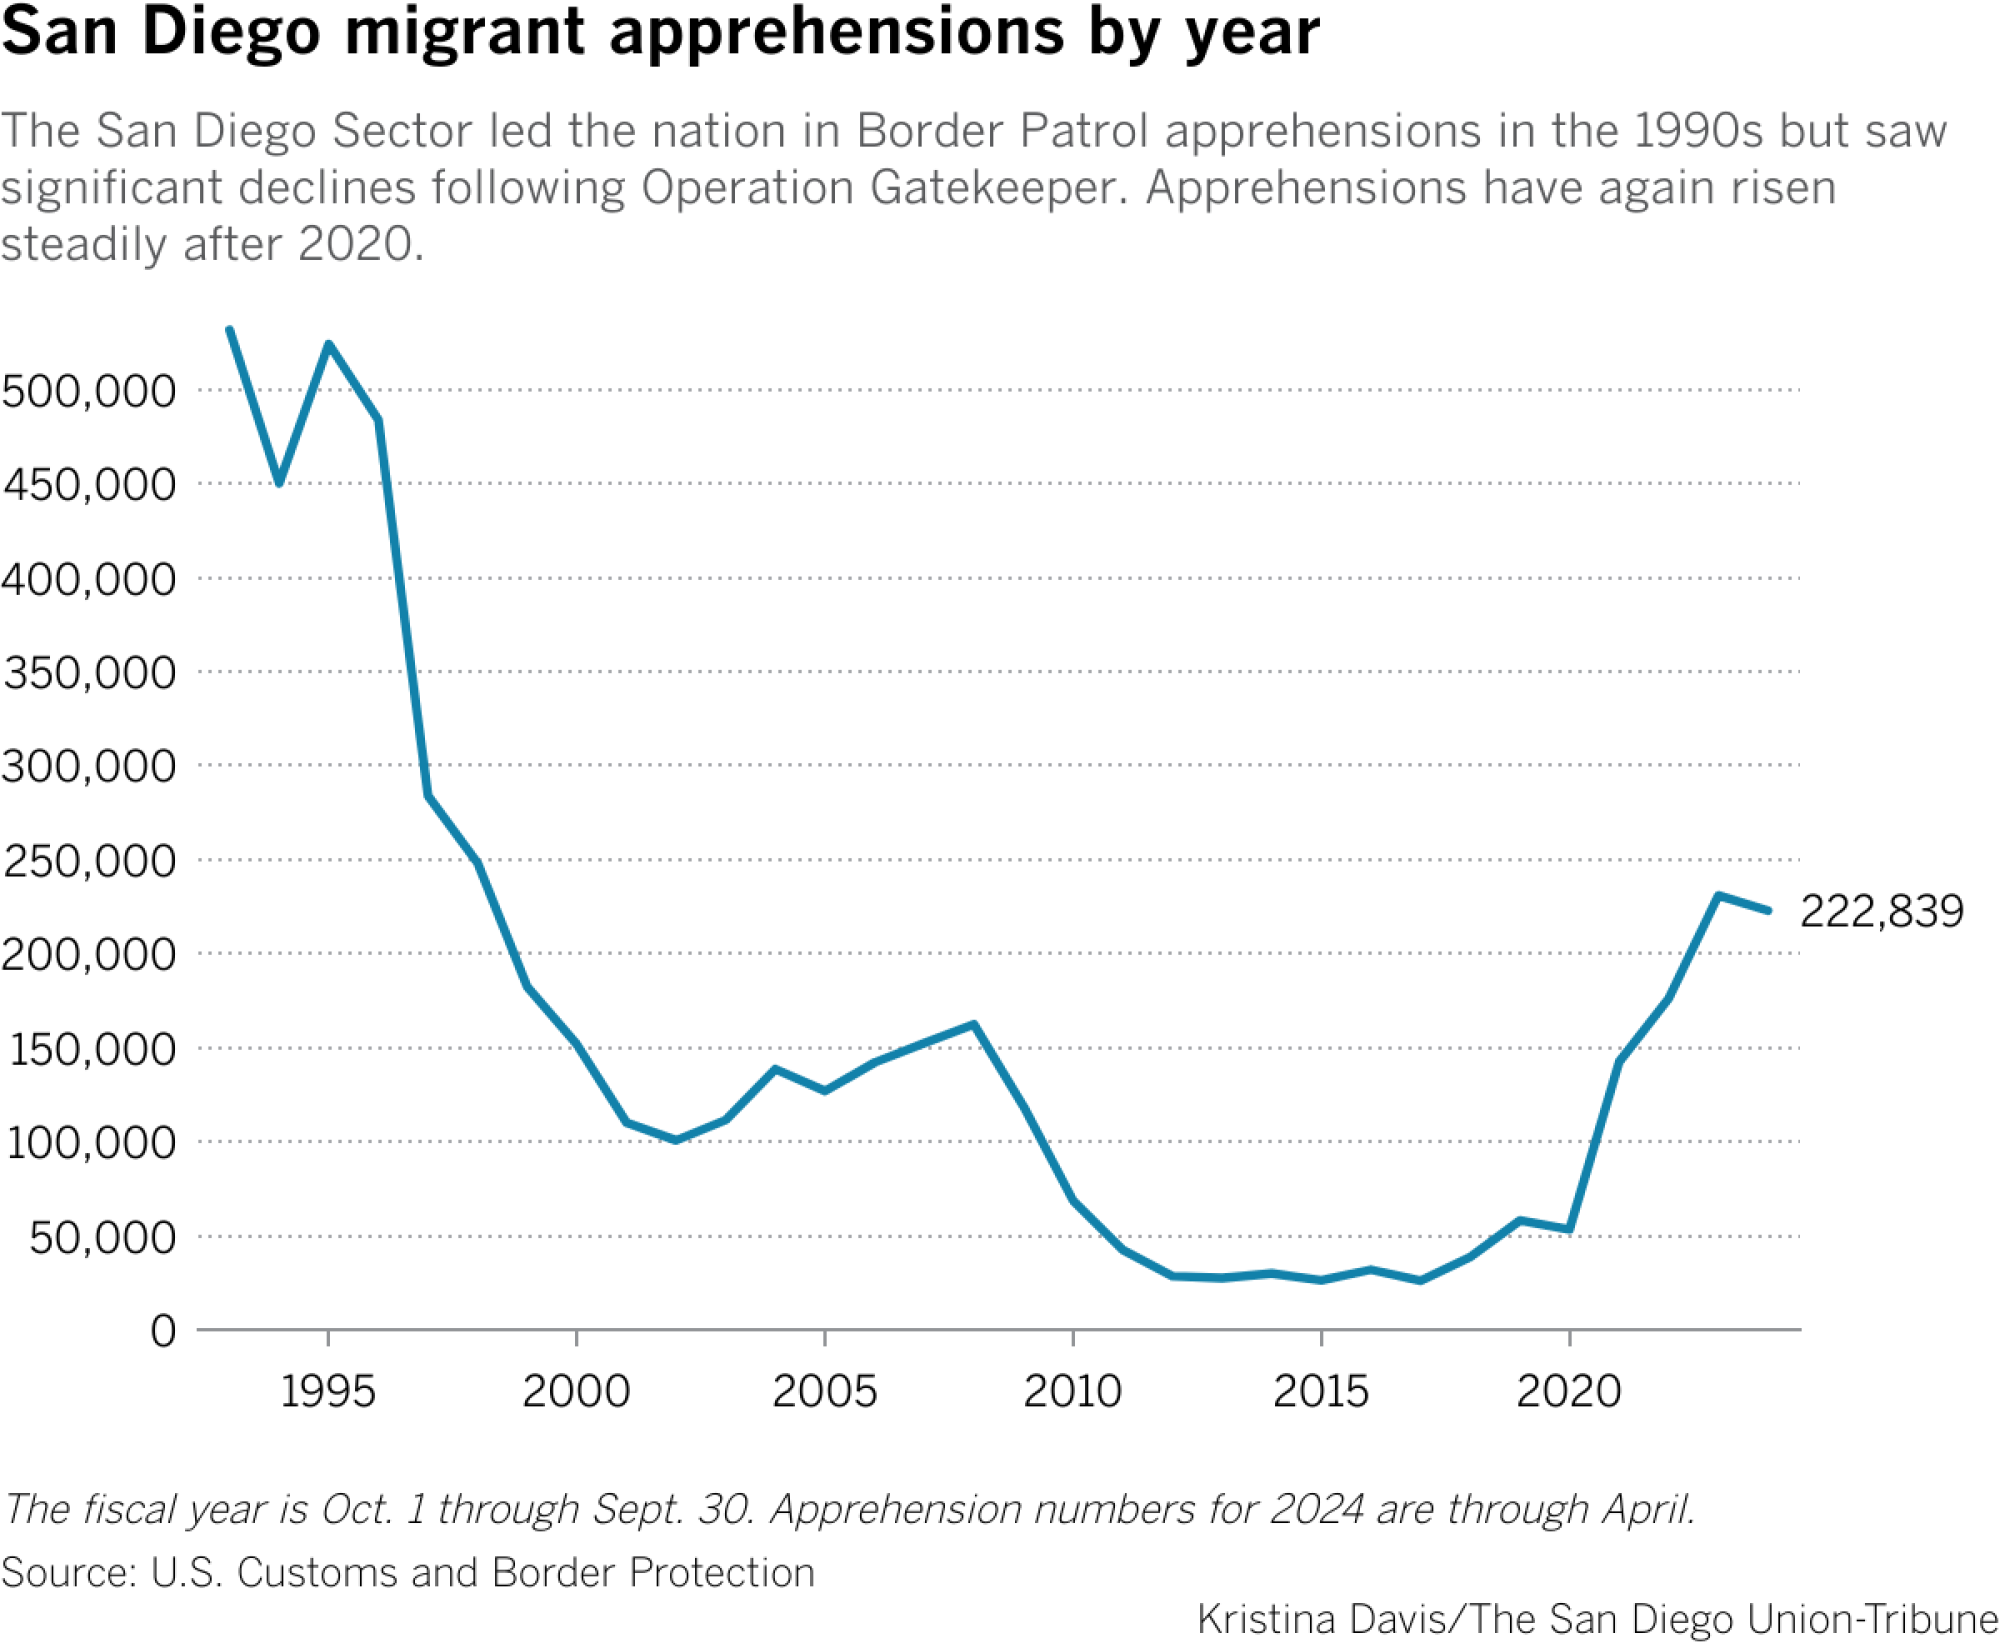 The San Diego sector led the nation in Border Patrol apprehensions in the 1990s but saw significant declines following Operation Gatekeeper.  Apprehensions increased steadily again after 2020.